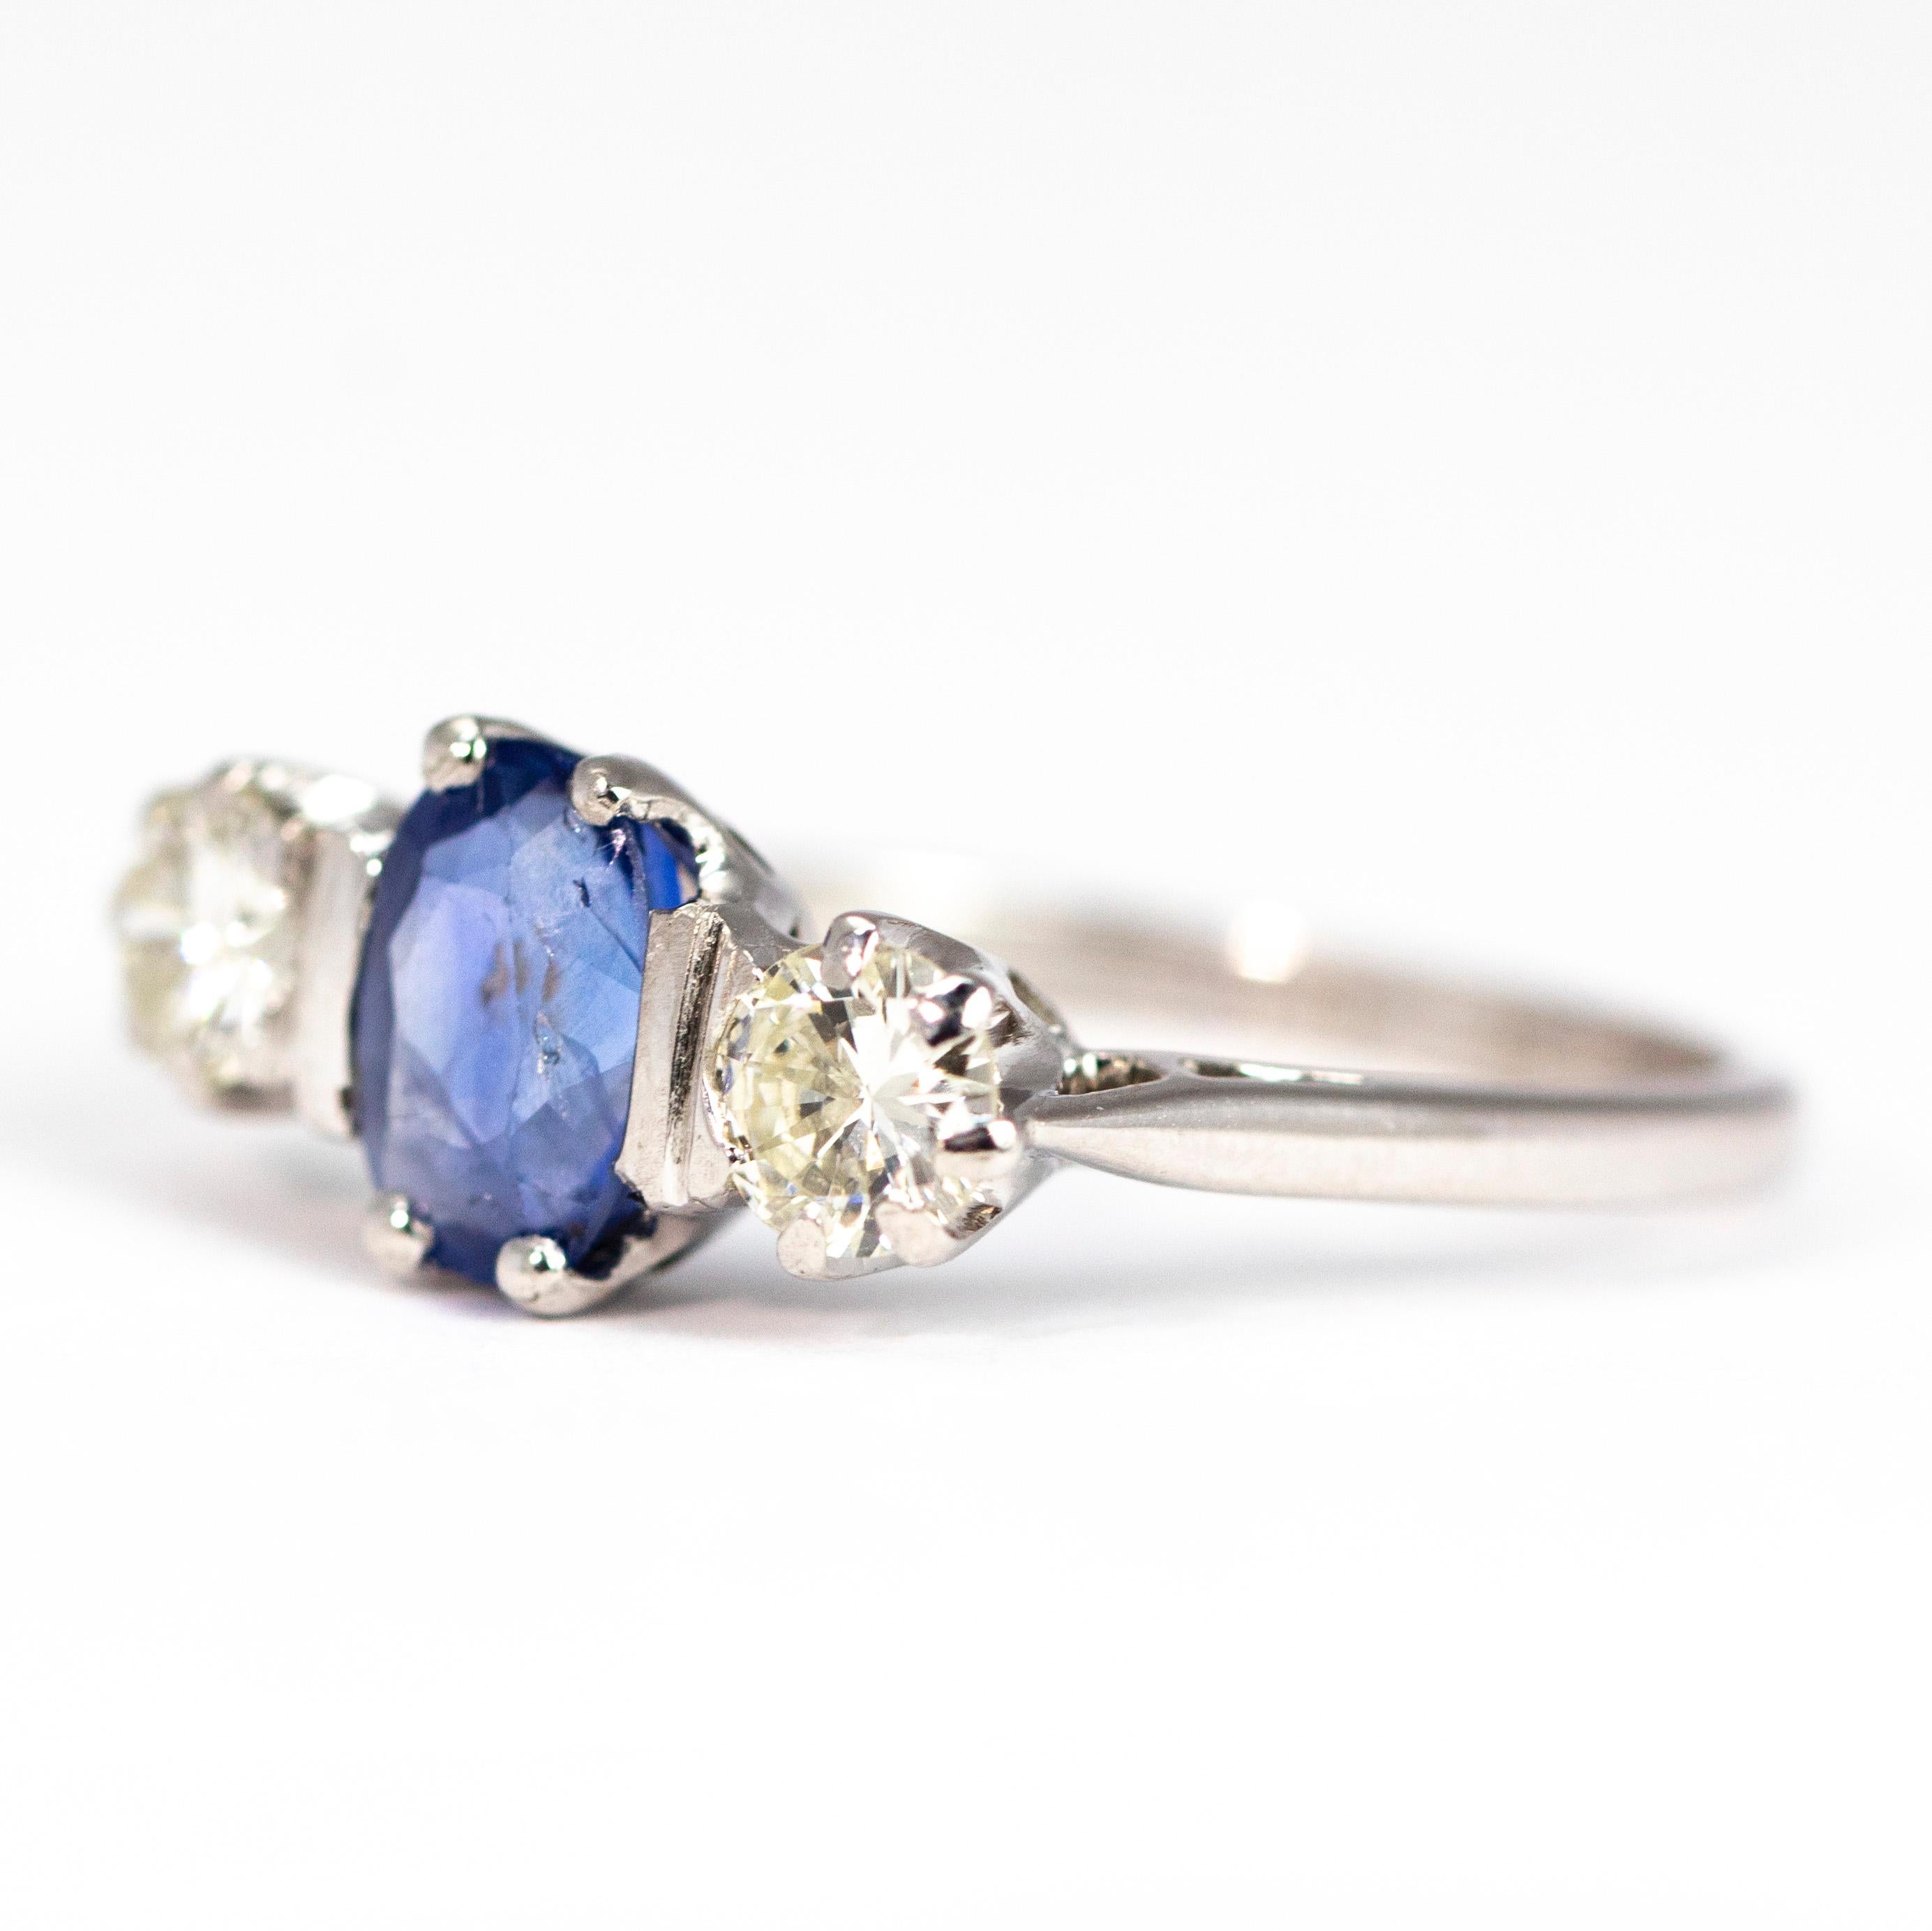 At the centre of this trio of beautiful stones is a bright blue sapphire measuring approximately 1.5carats. The diamonds either side measure 45pts each, are H colour VS2 and have a wonderful sparkle .

Ring Size: Q or 8

Weight: 4g